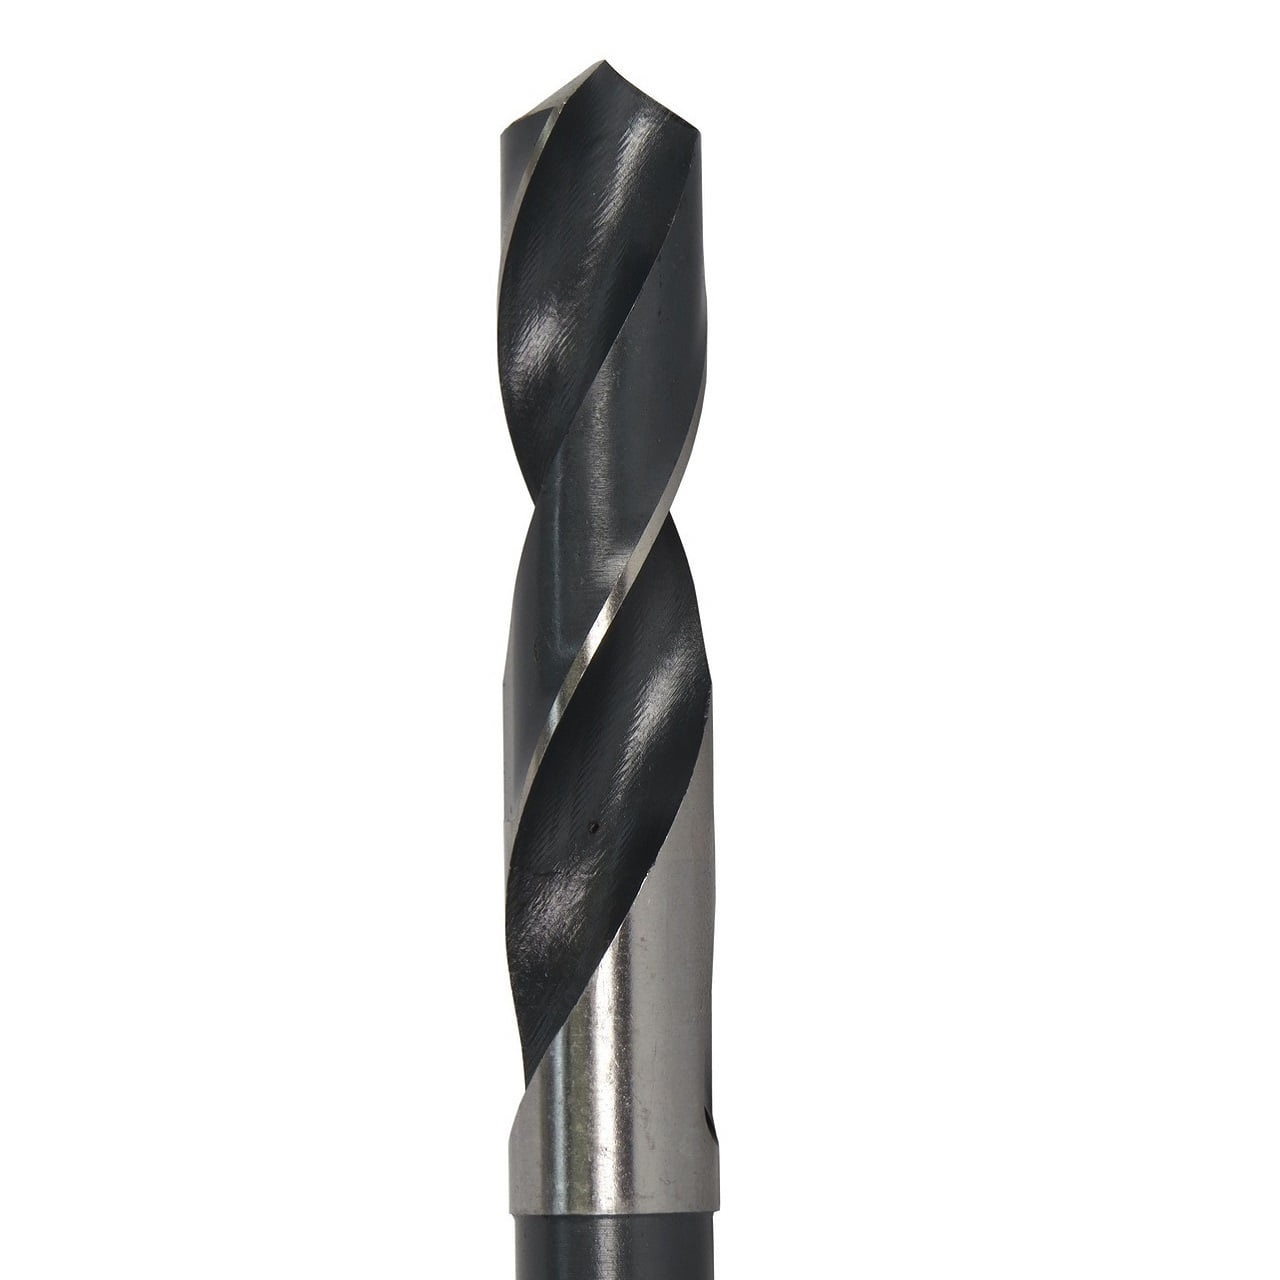 END MILL "NEW" BEST CARBIDE 4 FLUTE UNIVERSAL APPLICATION 9/32" .2812